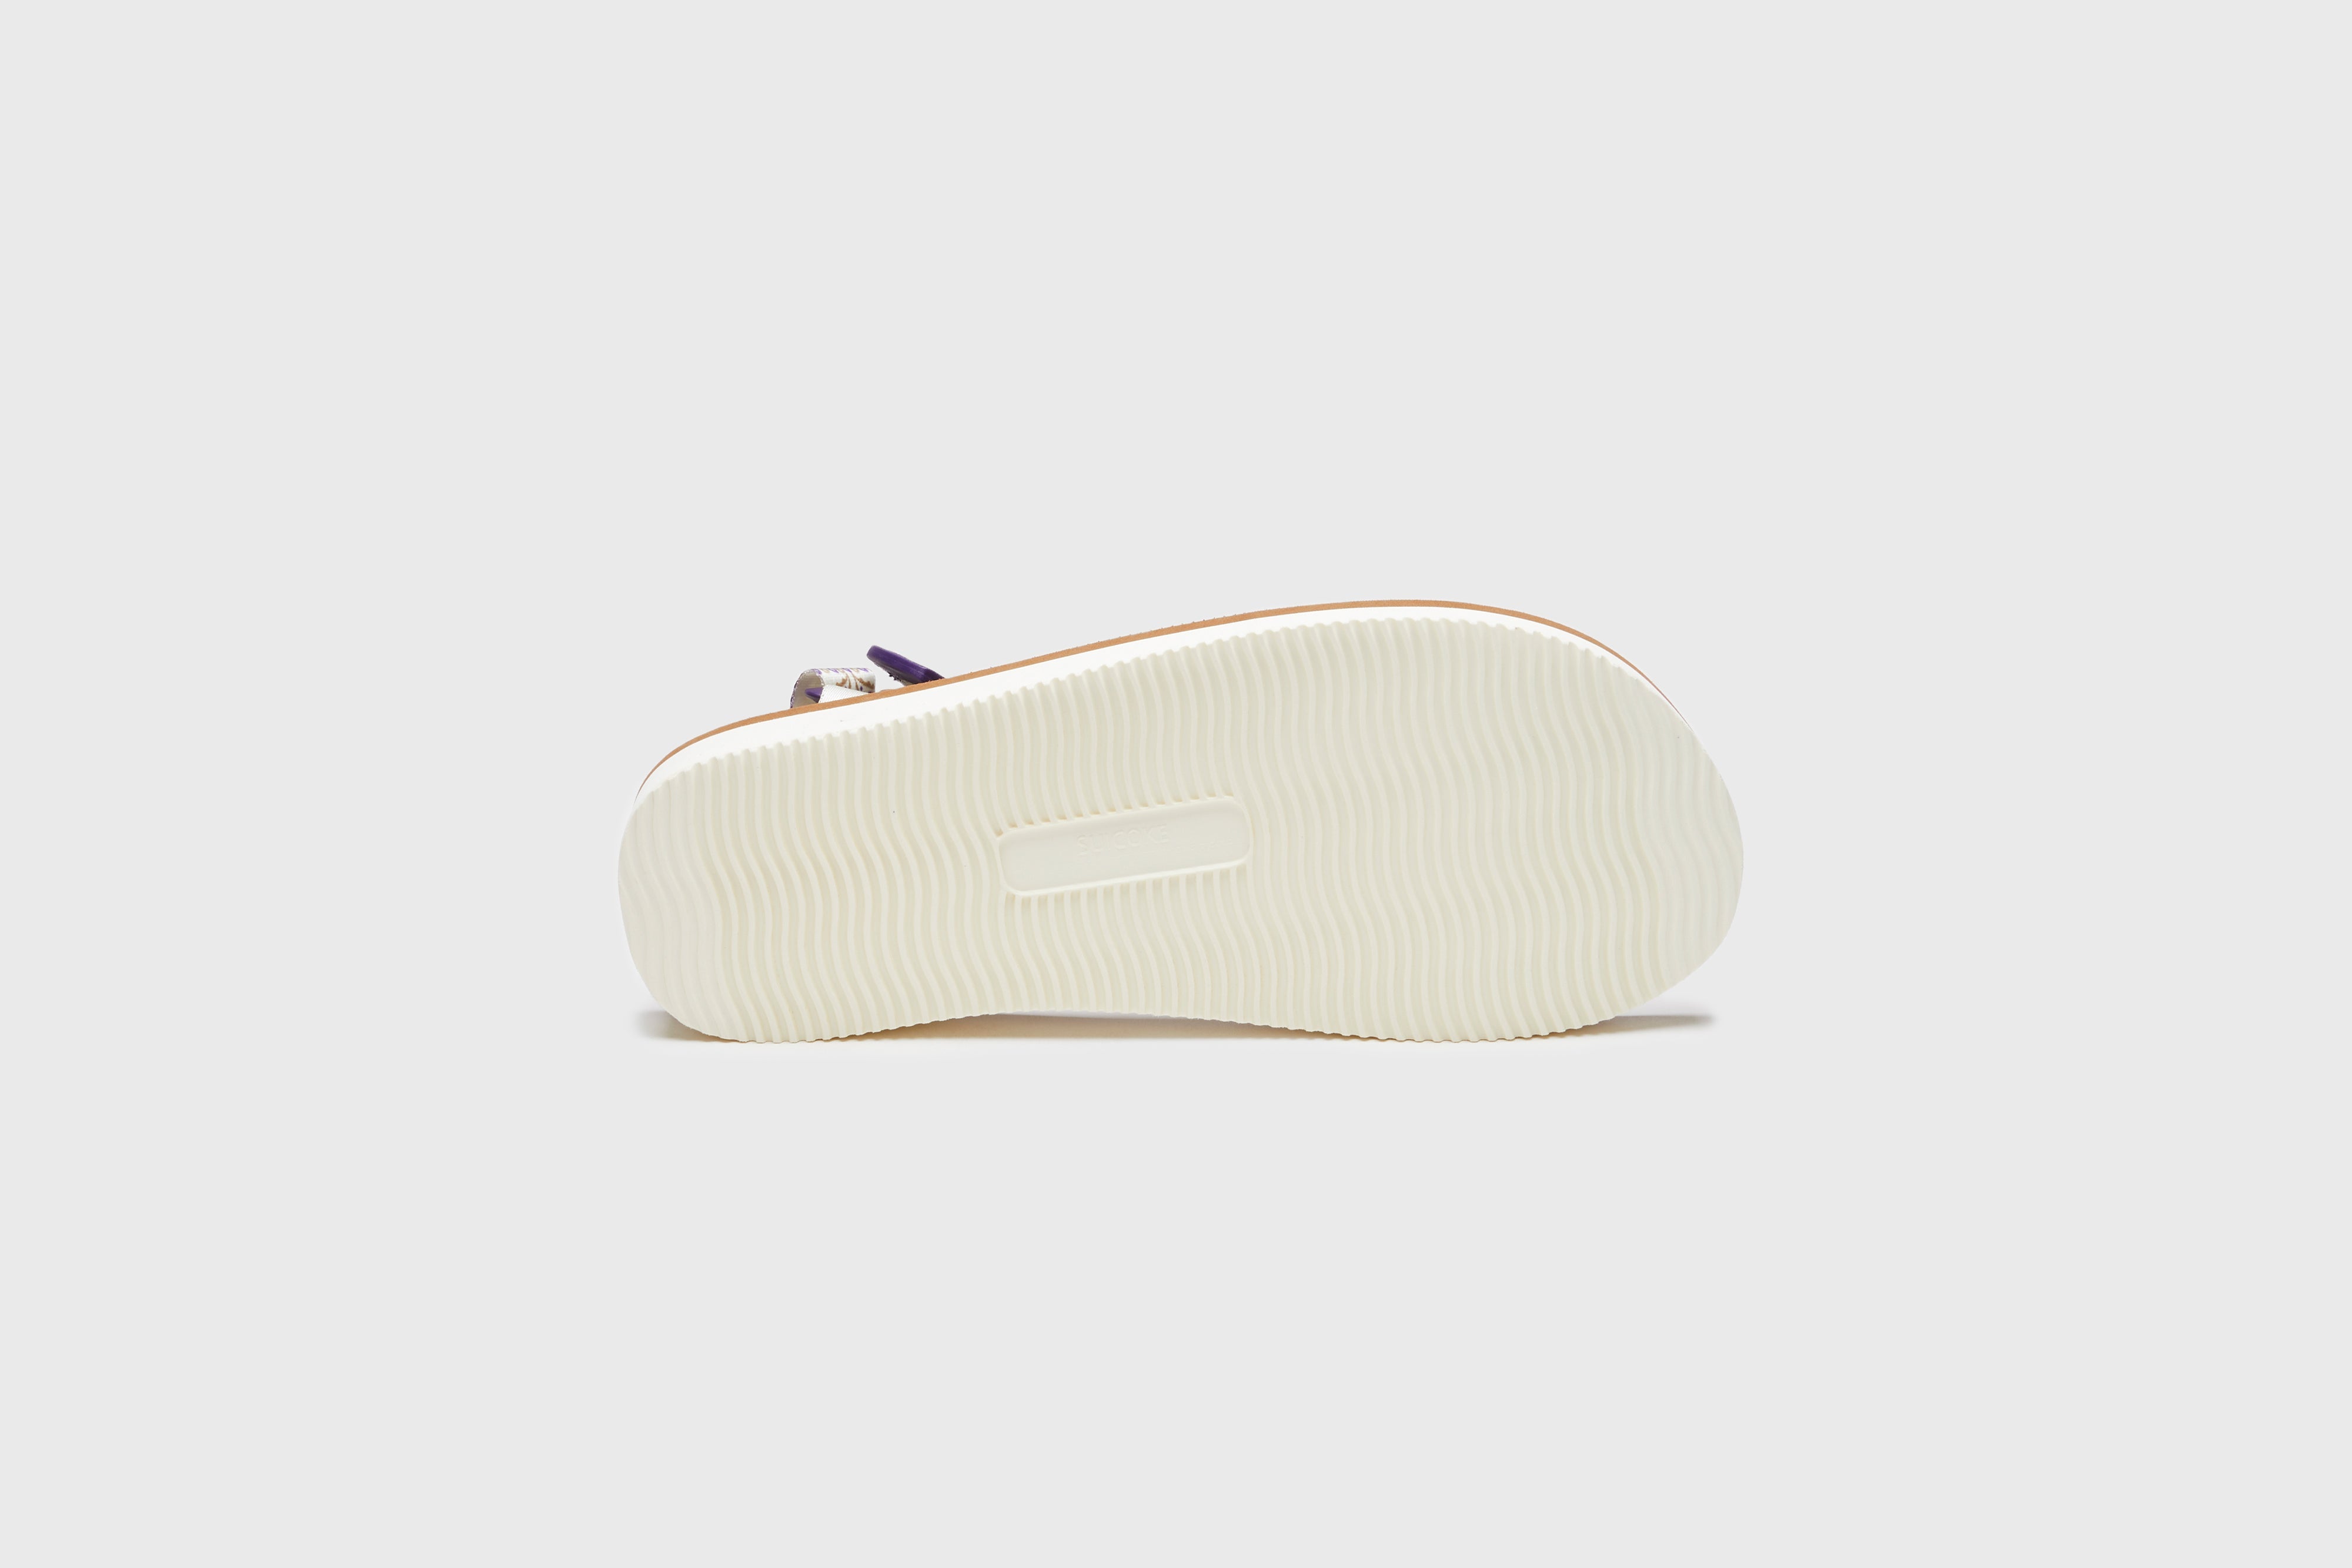 SUICOKE KISEE-PO sandals with ivory &amp; brown nylon upper, ivory &amp; brown midsole and sole, strap and logo patch. From Spring/Summer 2023 collection on eightywingold Web Store, an official partner of SUICOKE. OG-044PO IVORY X BROWN